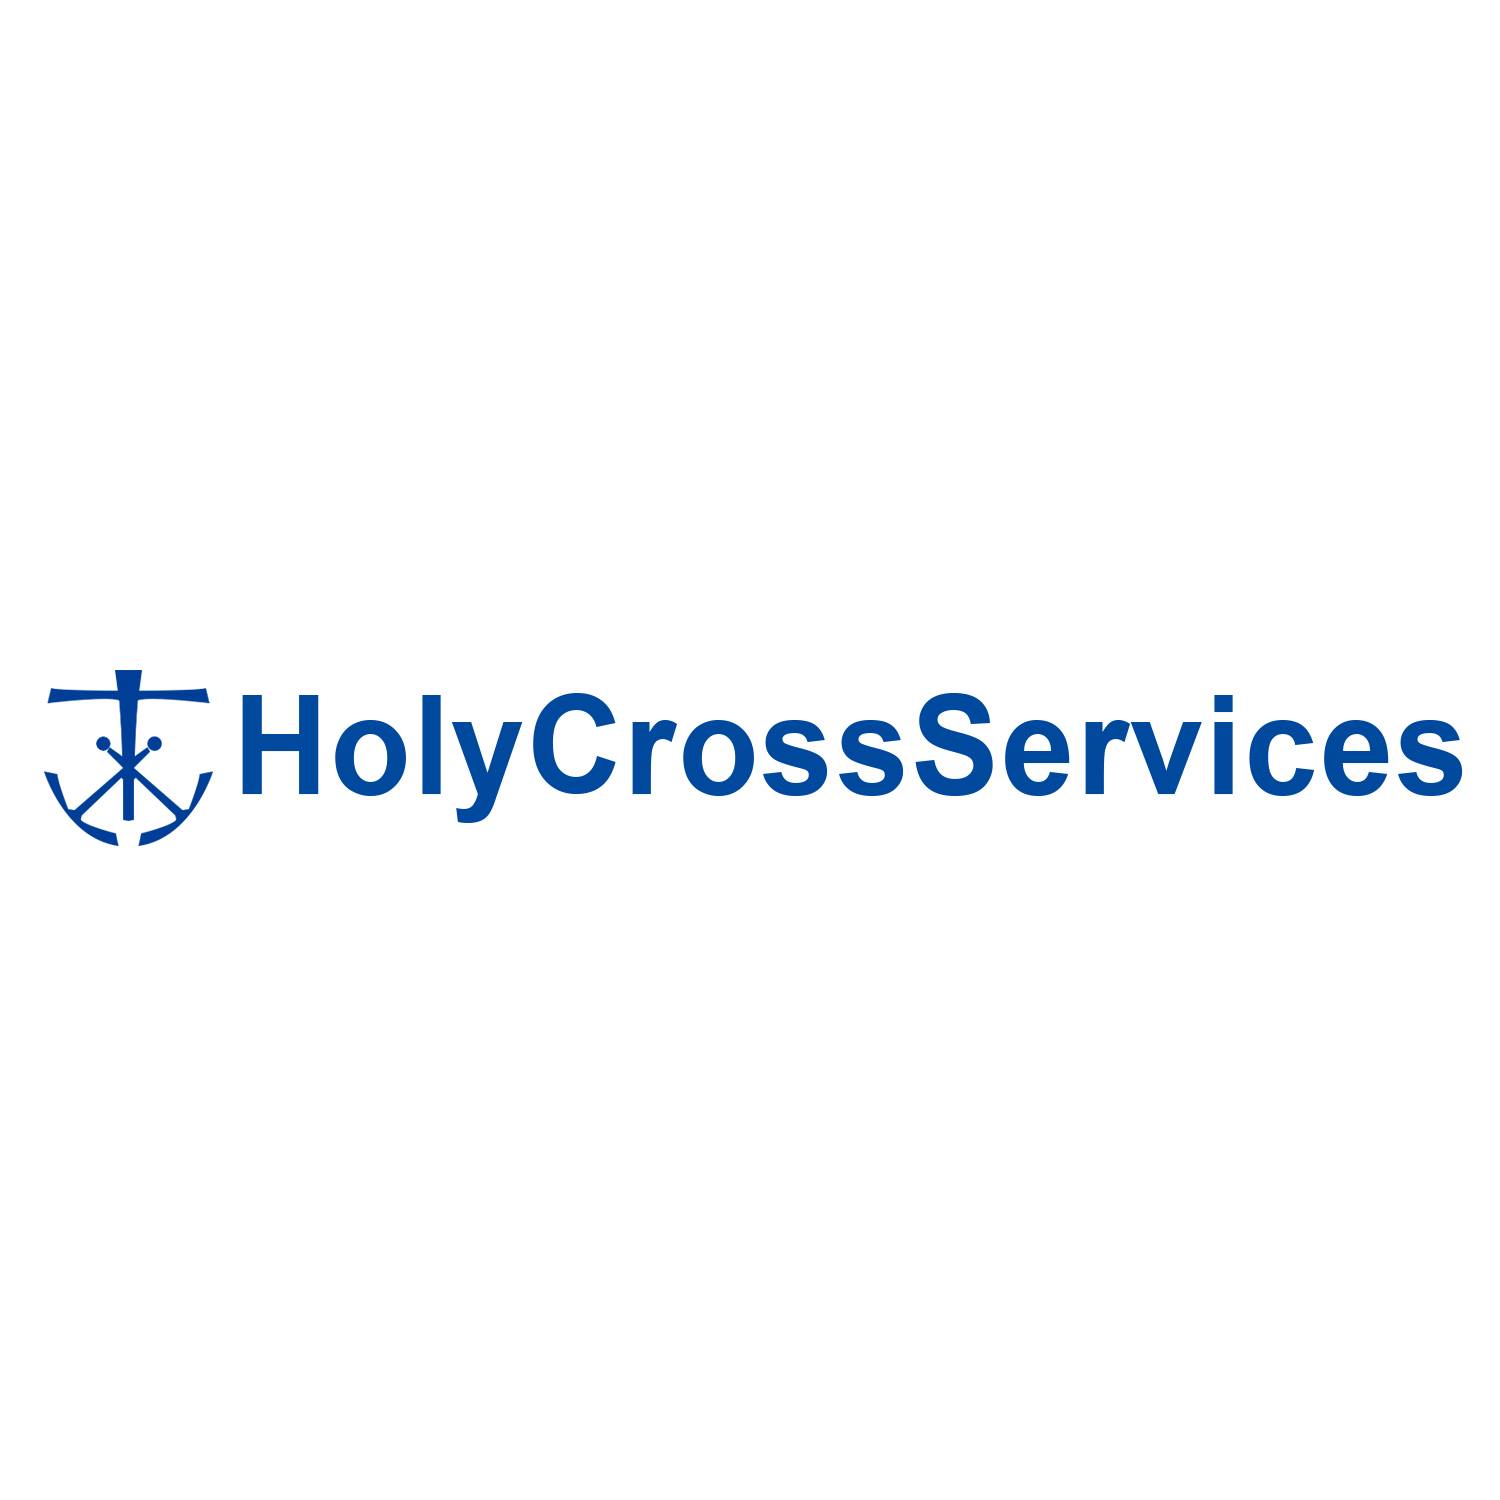 Holy Cross Services